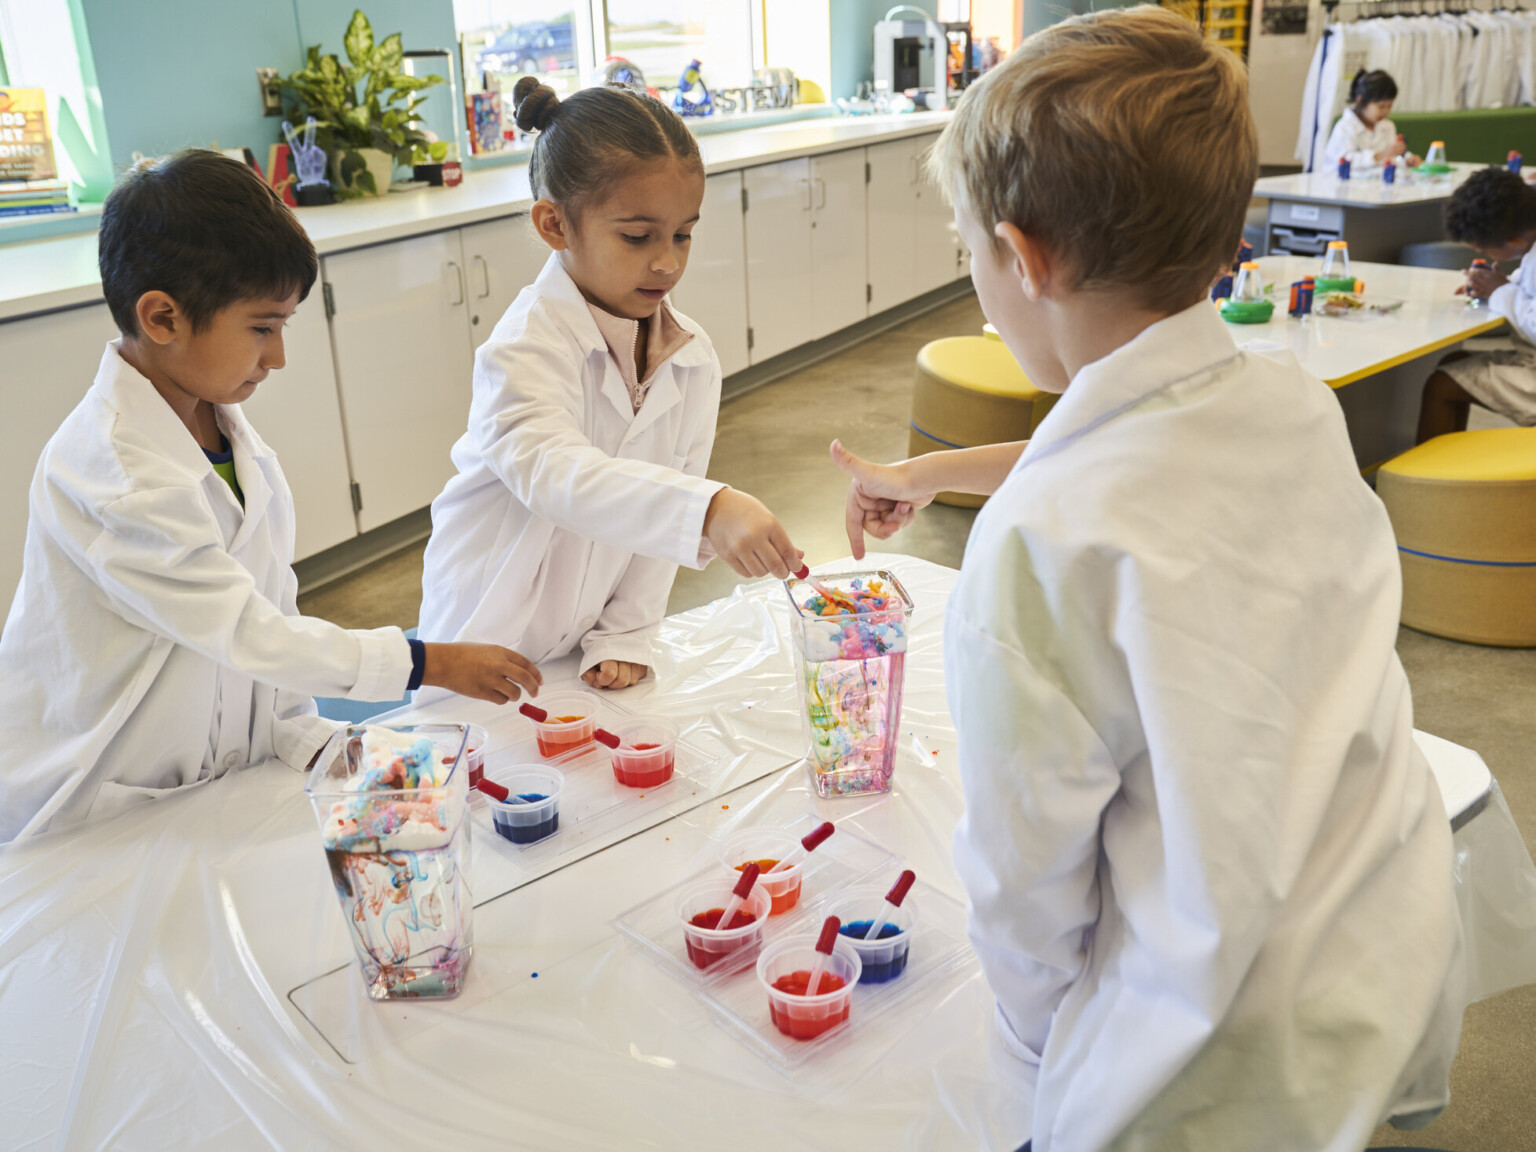 Children in white lab coats collaborating on art project